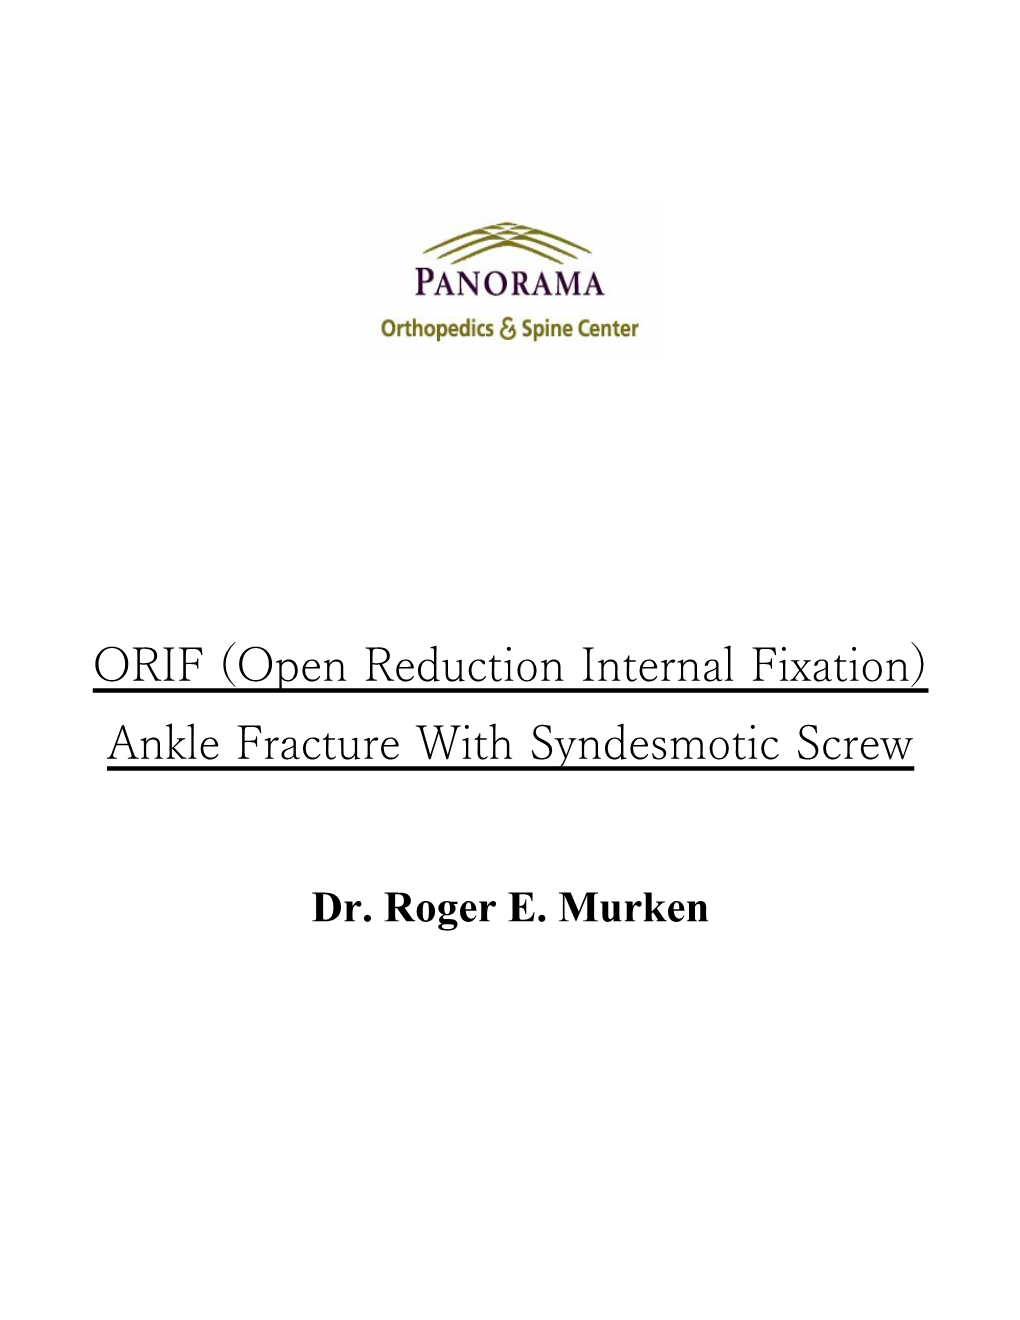 ORIF (Open Reduction Internal Fixation) Ankle Fracture with Syndesmotic Screw